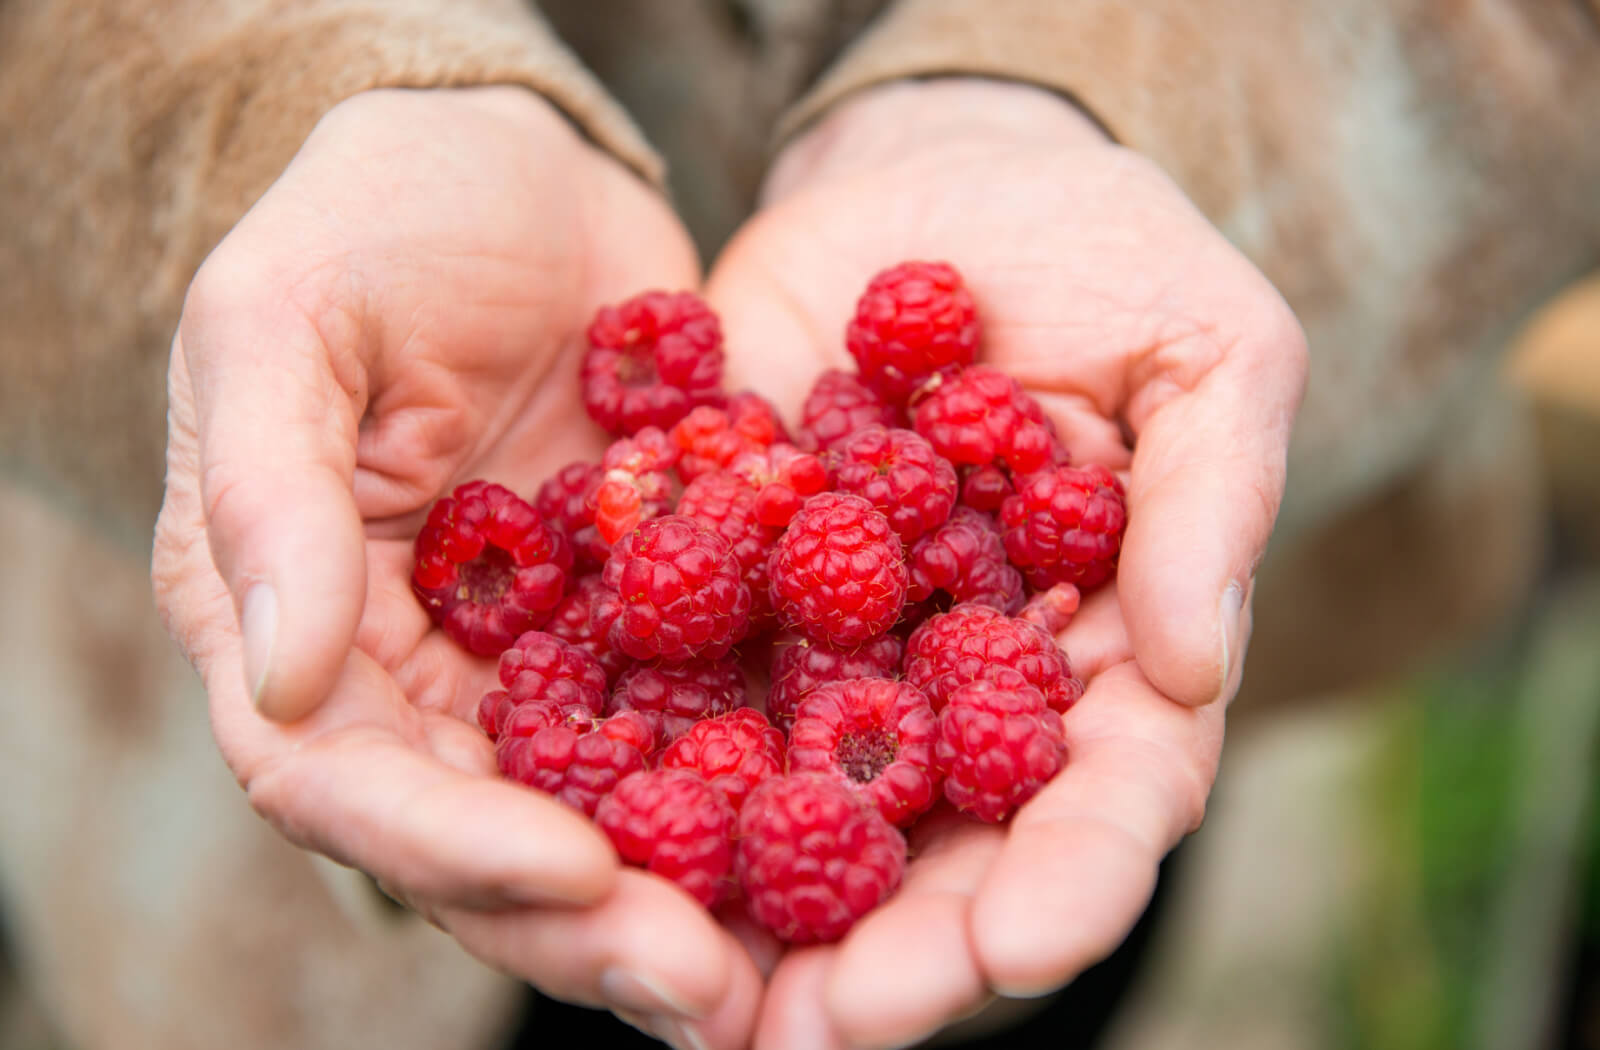 Close-up of an older adult’s hands showing off a handful of raspberries